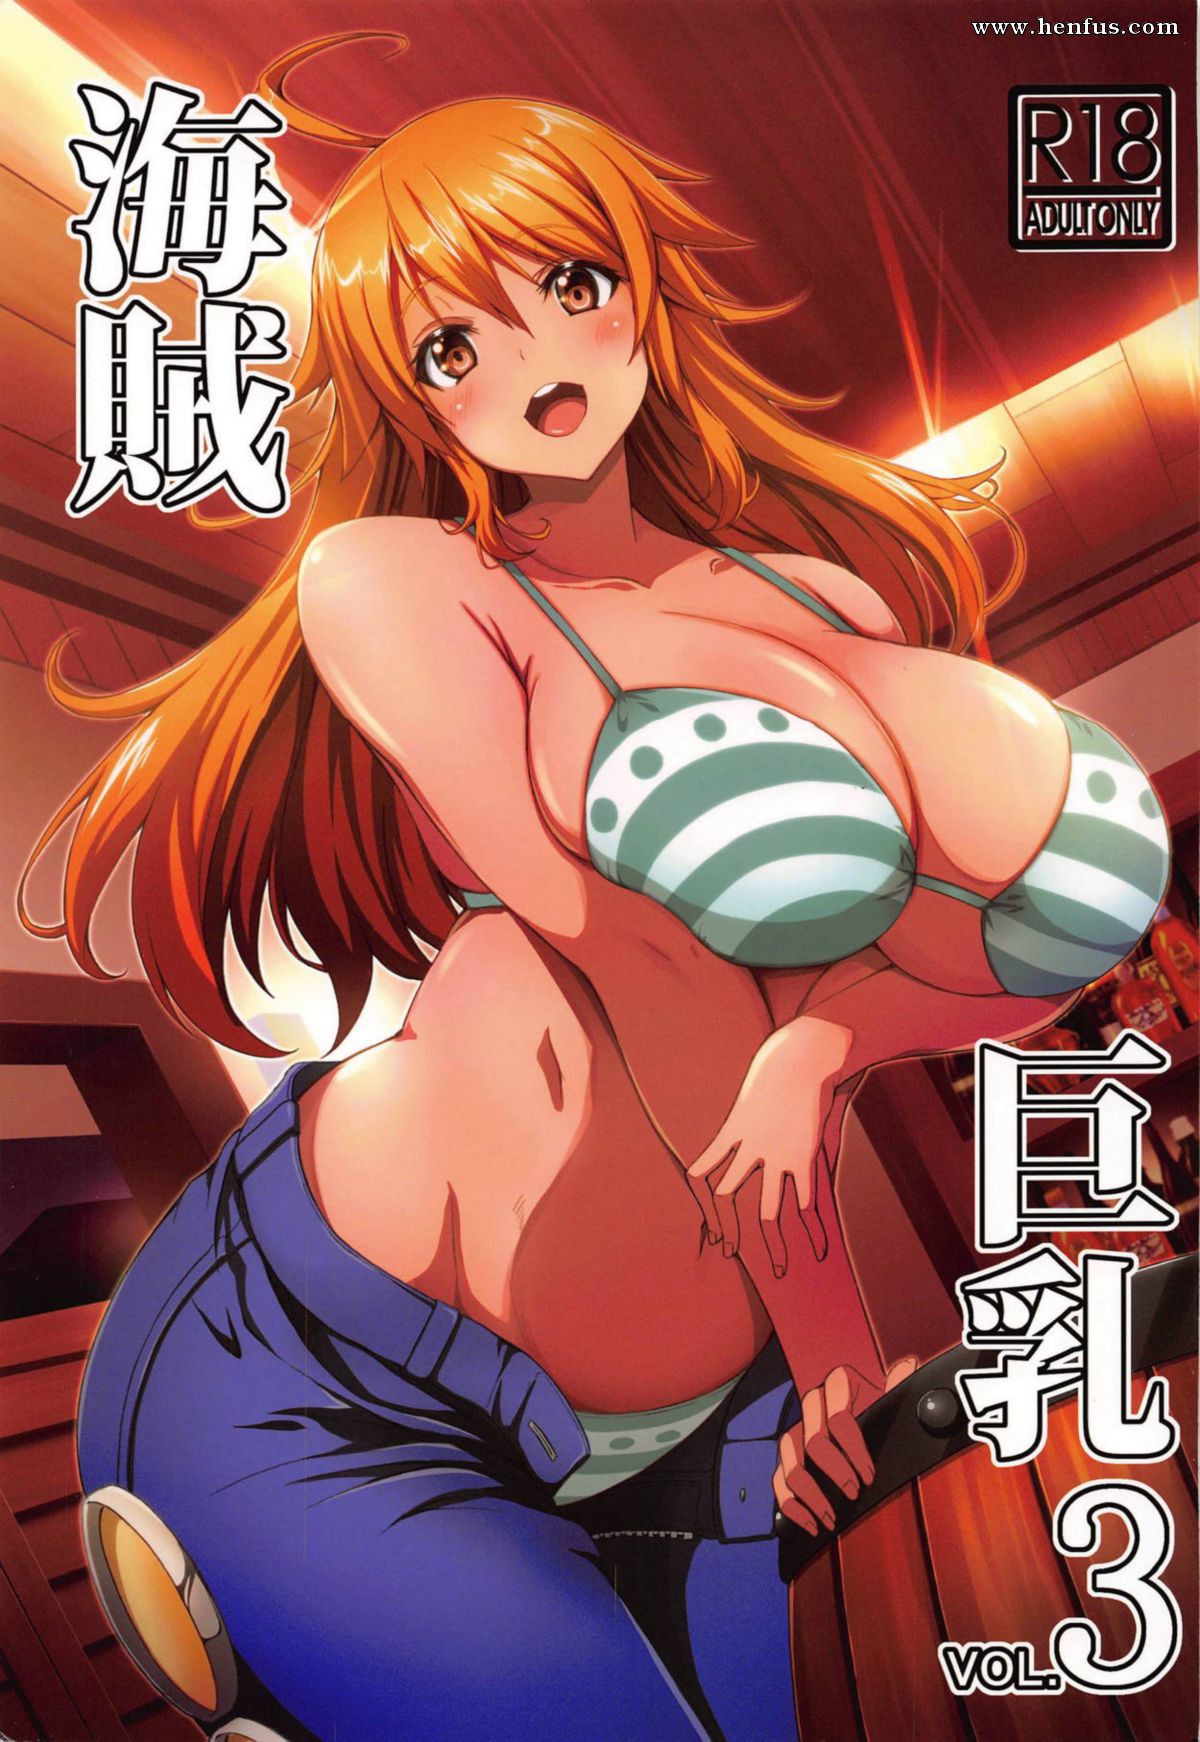 Big Tits Pirate Porn - Page 1 | Brave-Heart-Petit/The-Big-Breasted-Pirate/Issue-3 | Henfus -  Hentai and Manga Sex and Porn Comics